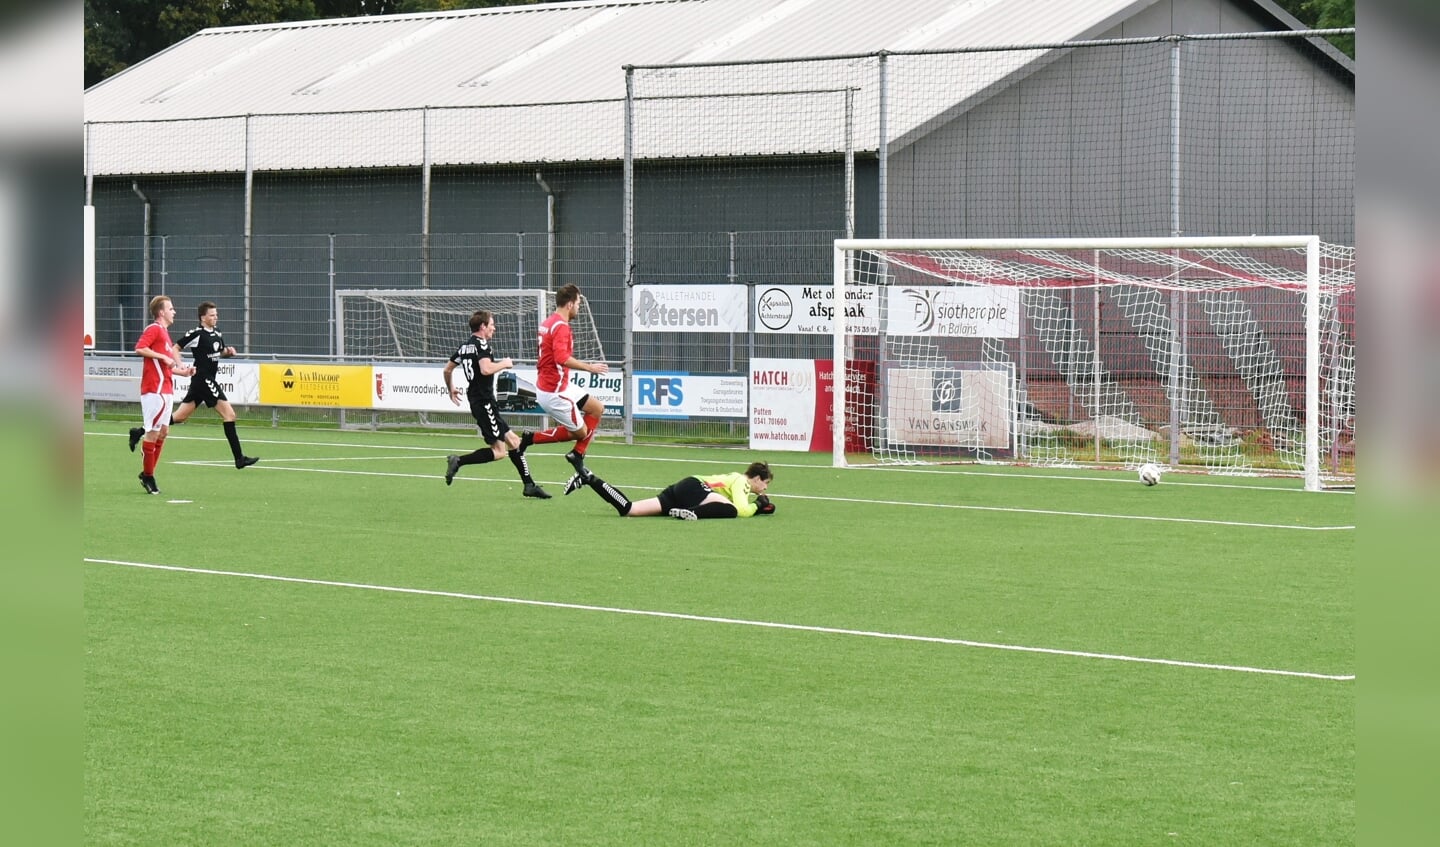 Rood Wit scoort 2-0